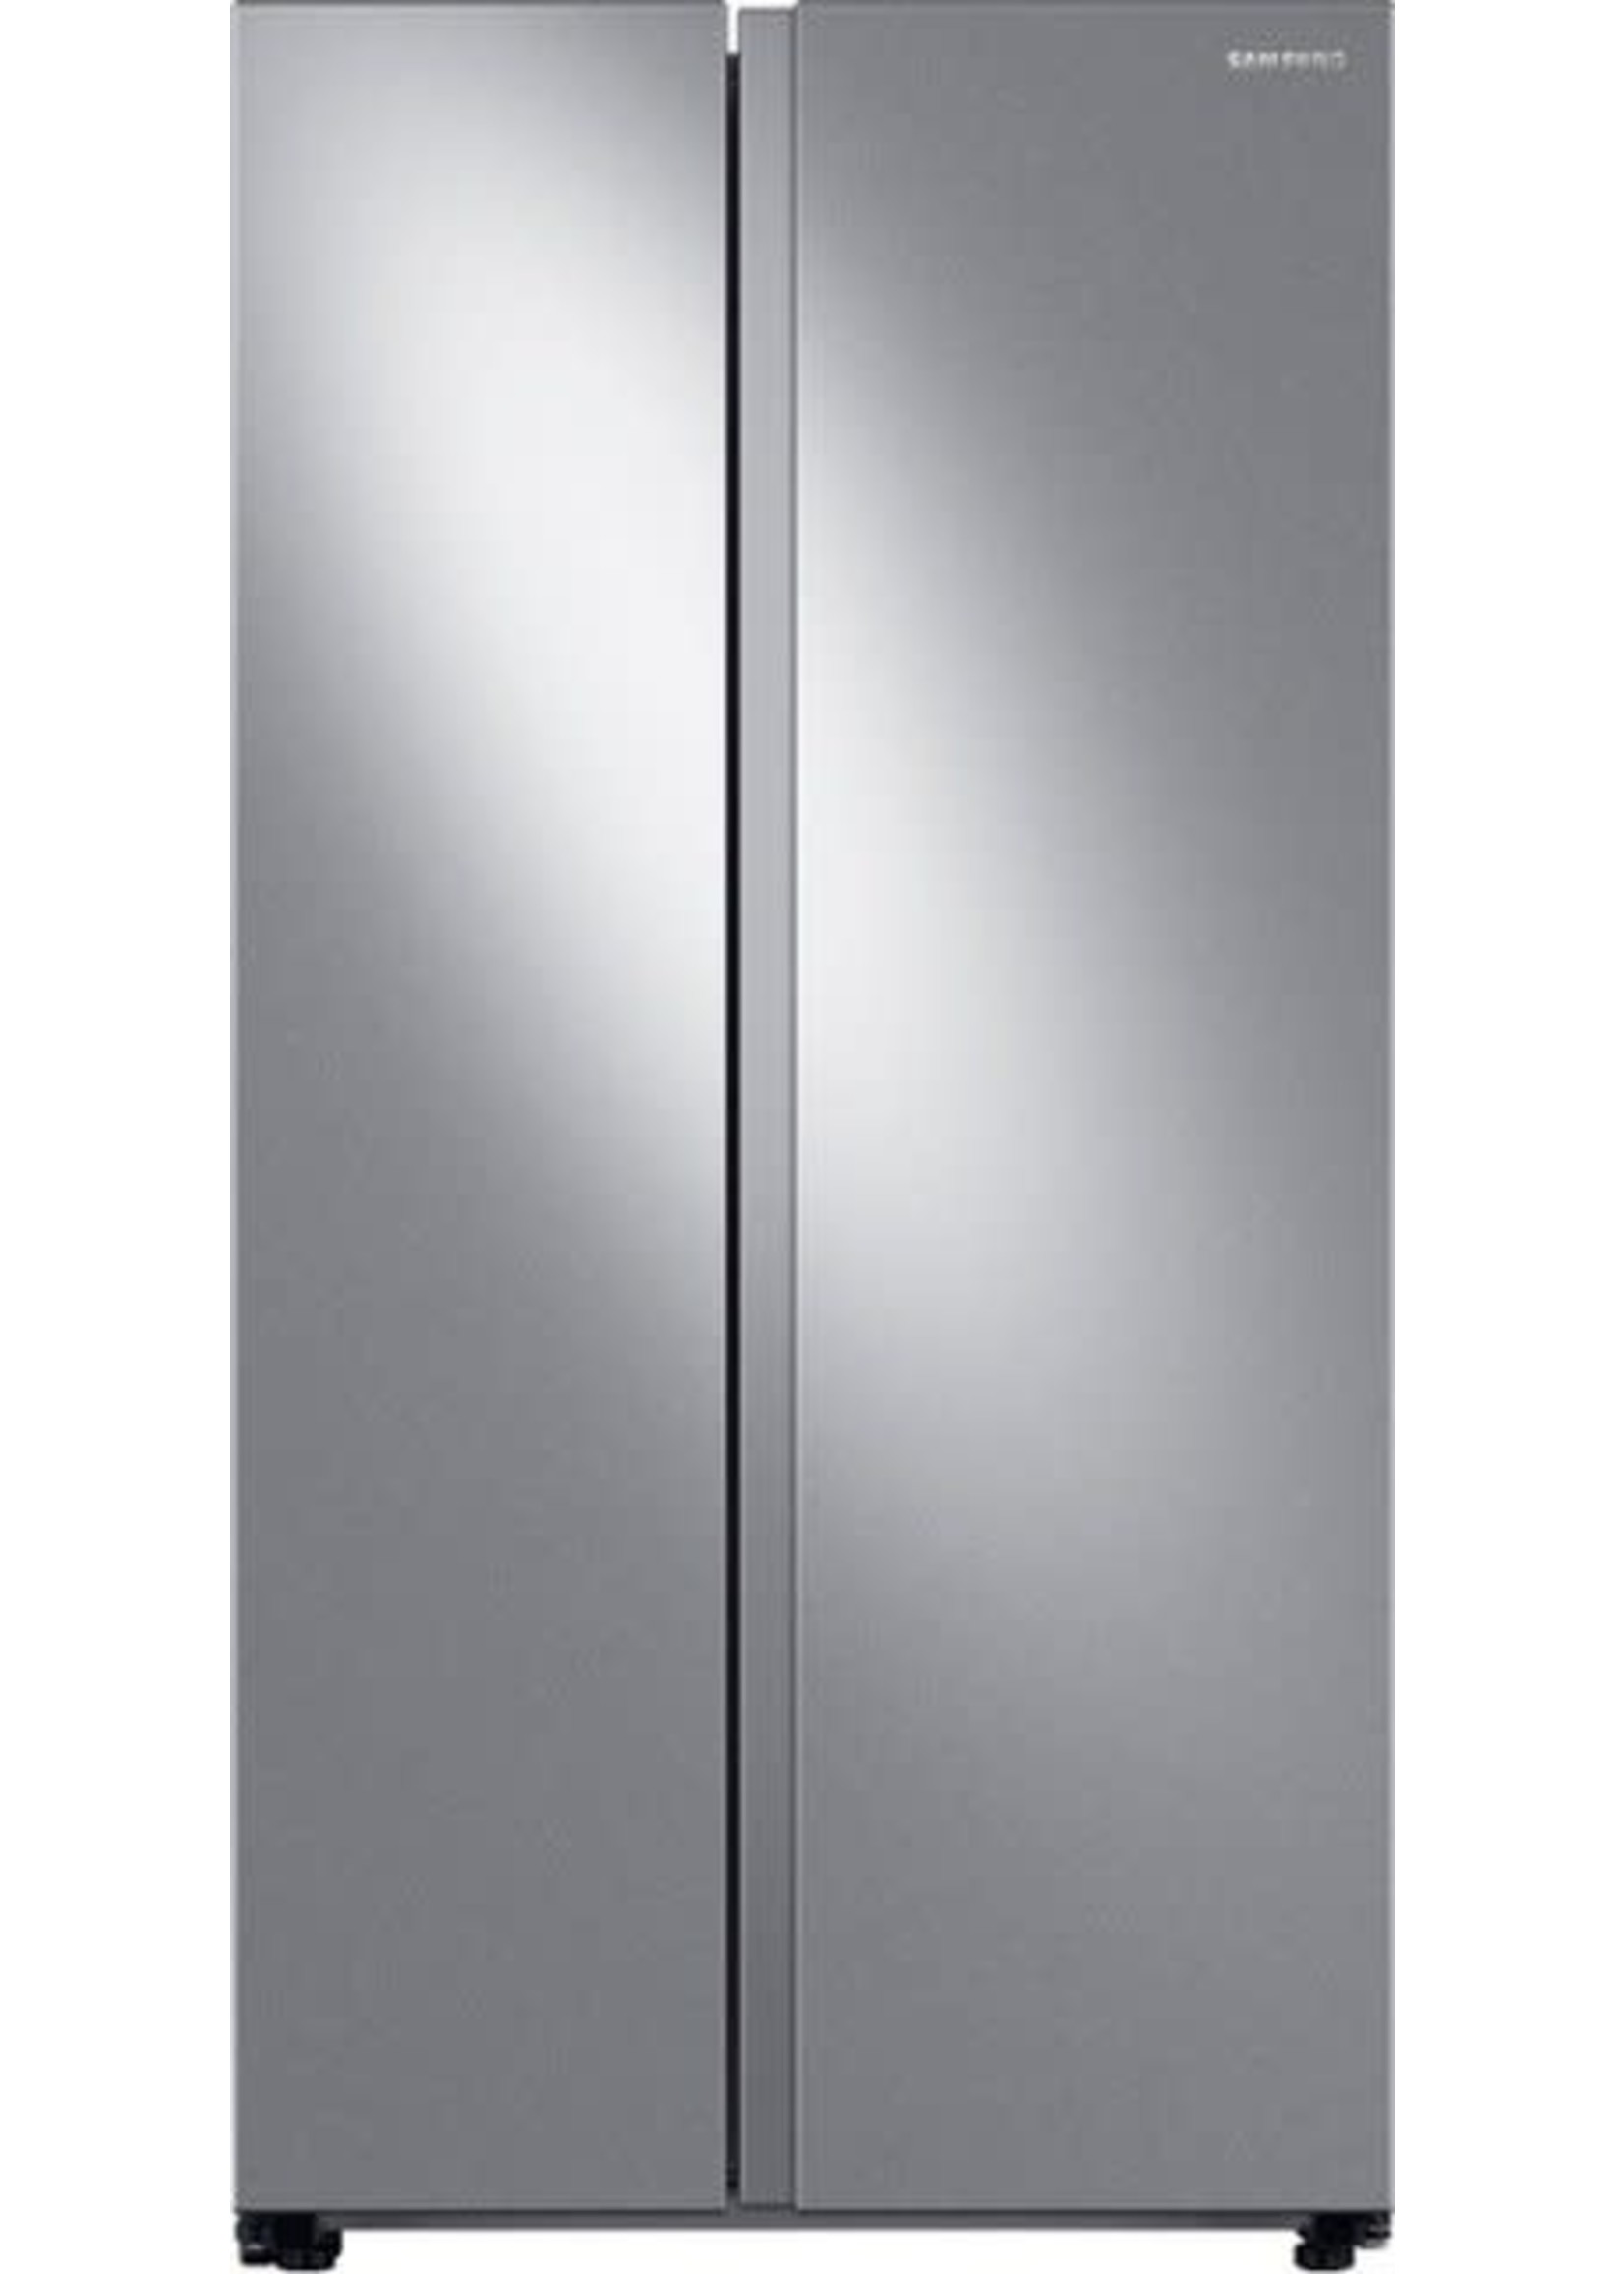 Whirlpool - 25.1 Cu. Ft. Side-by-Side Refrigerator - Stainless steel